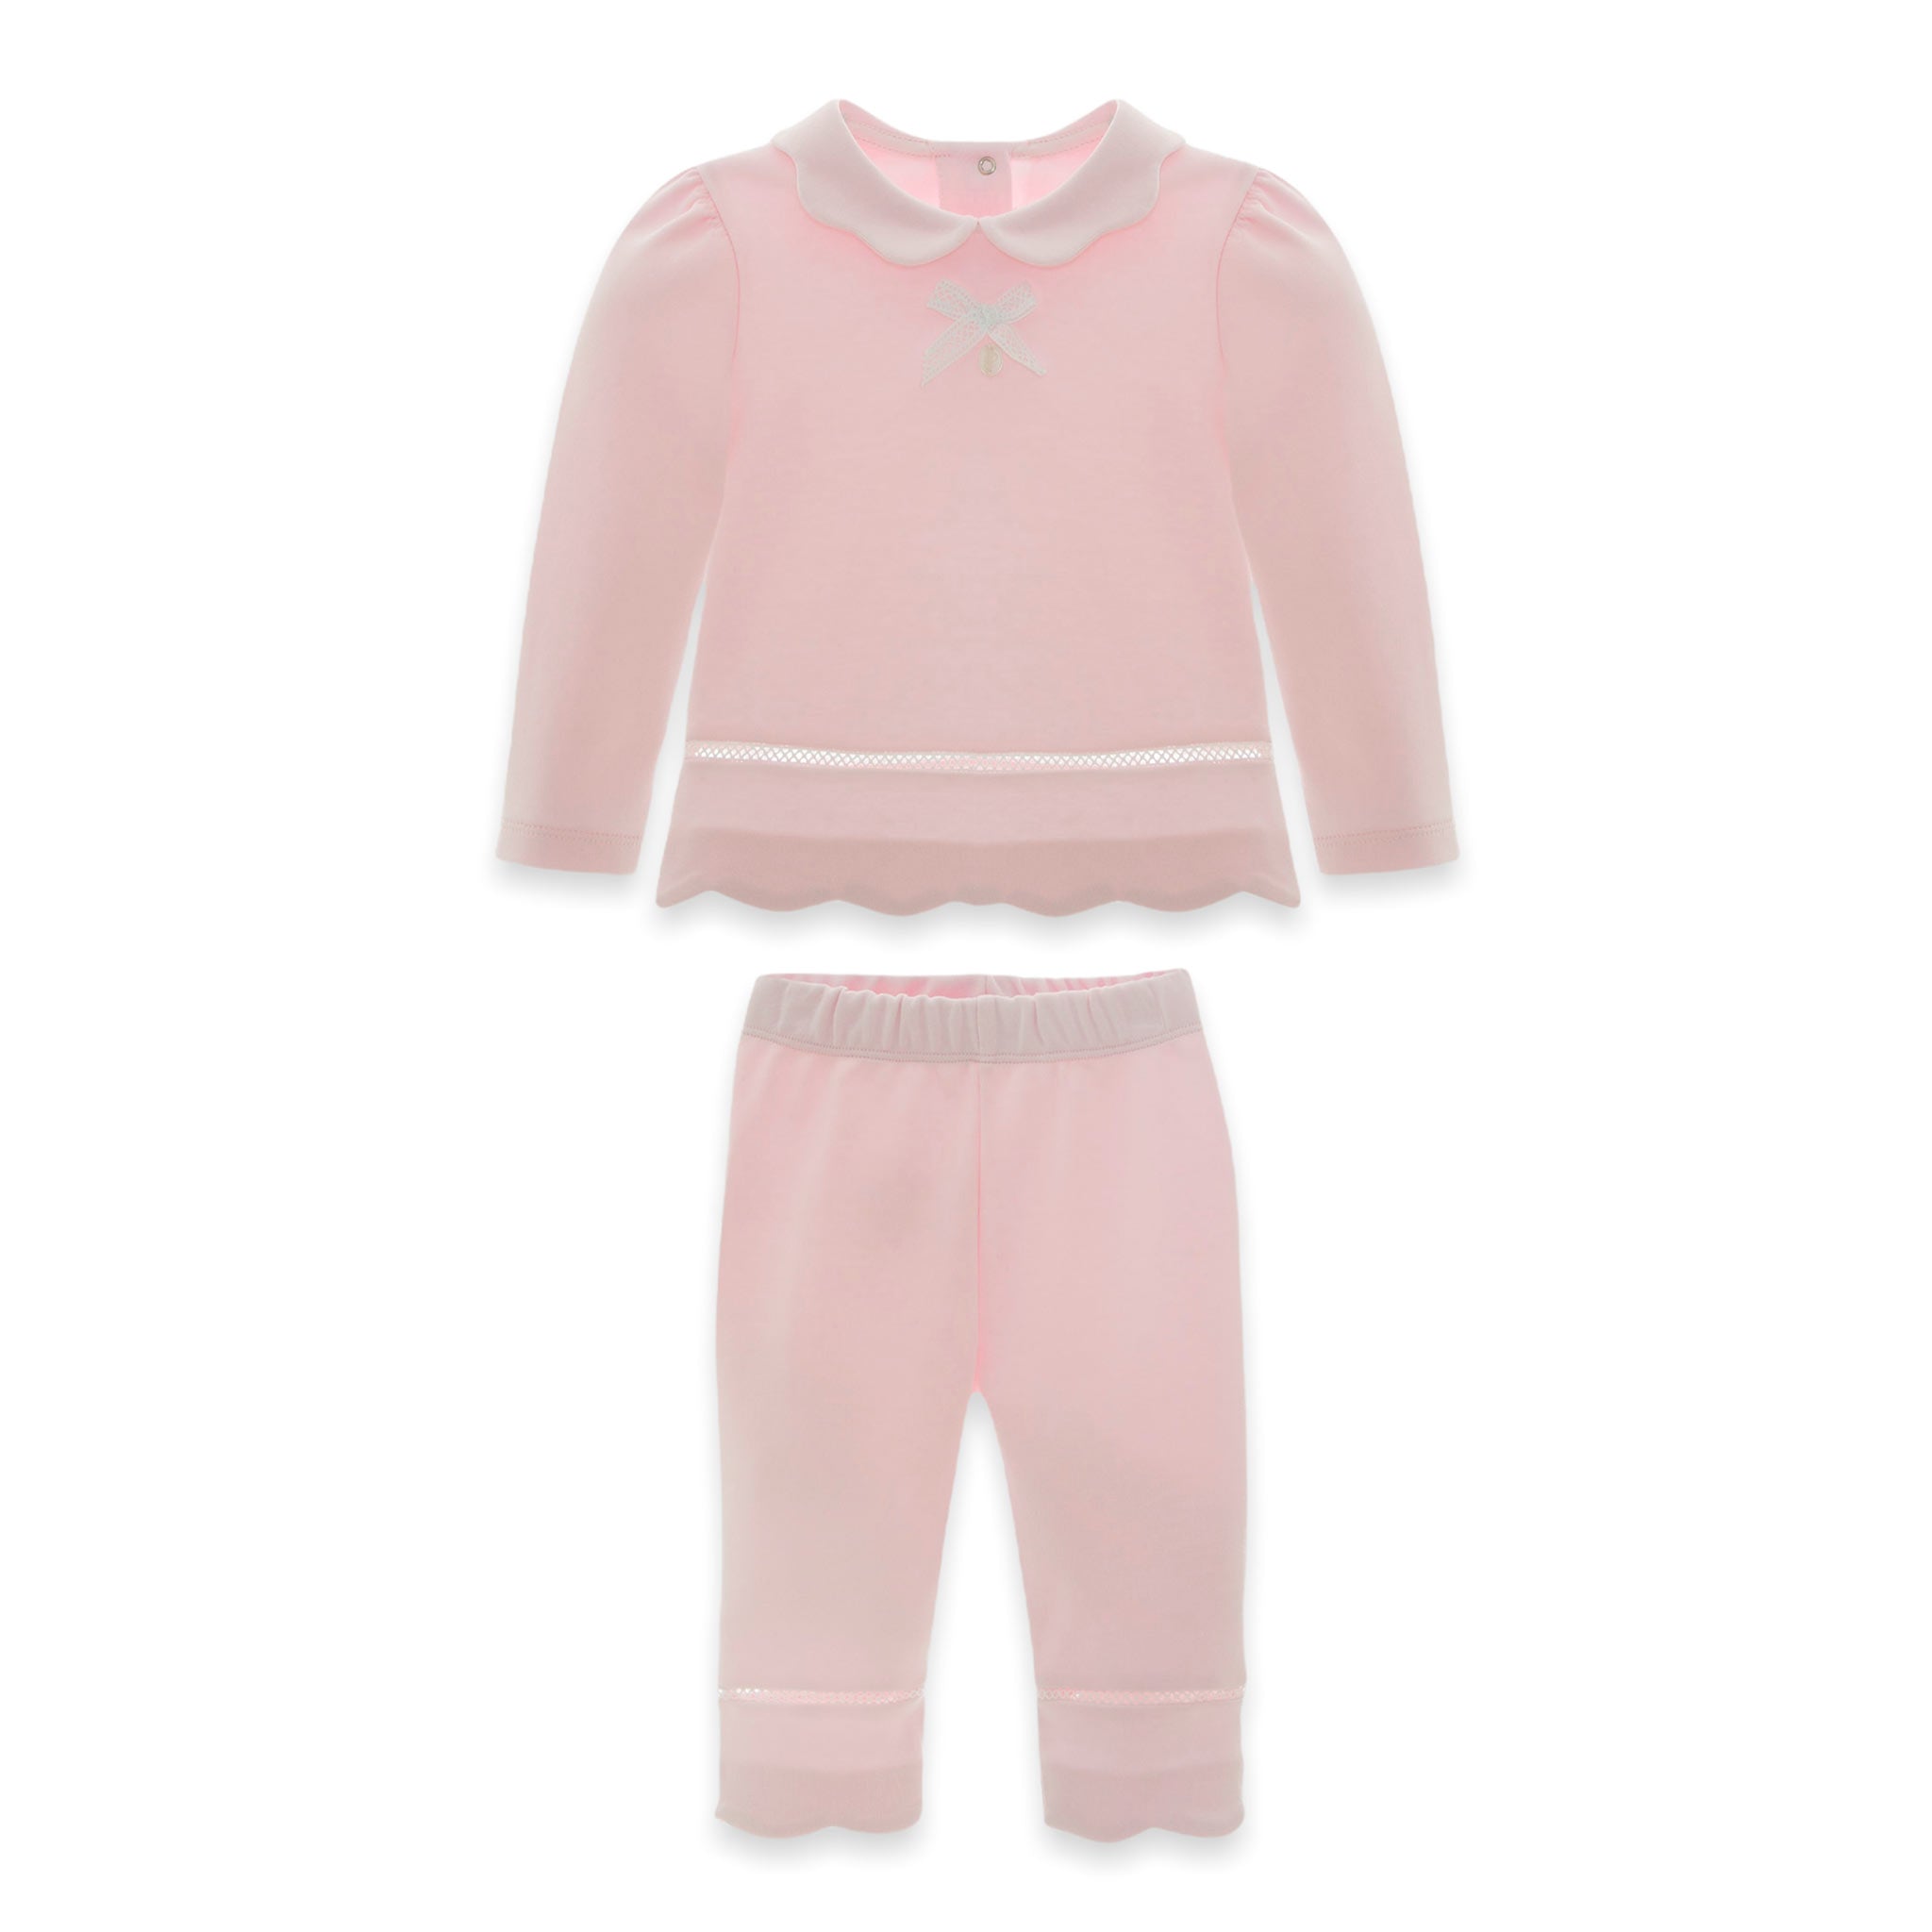 patachou girls tracksuit pink with scalloped collar